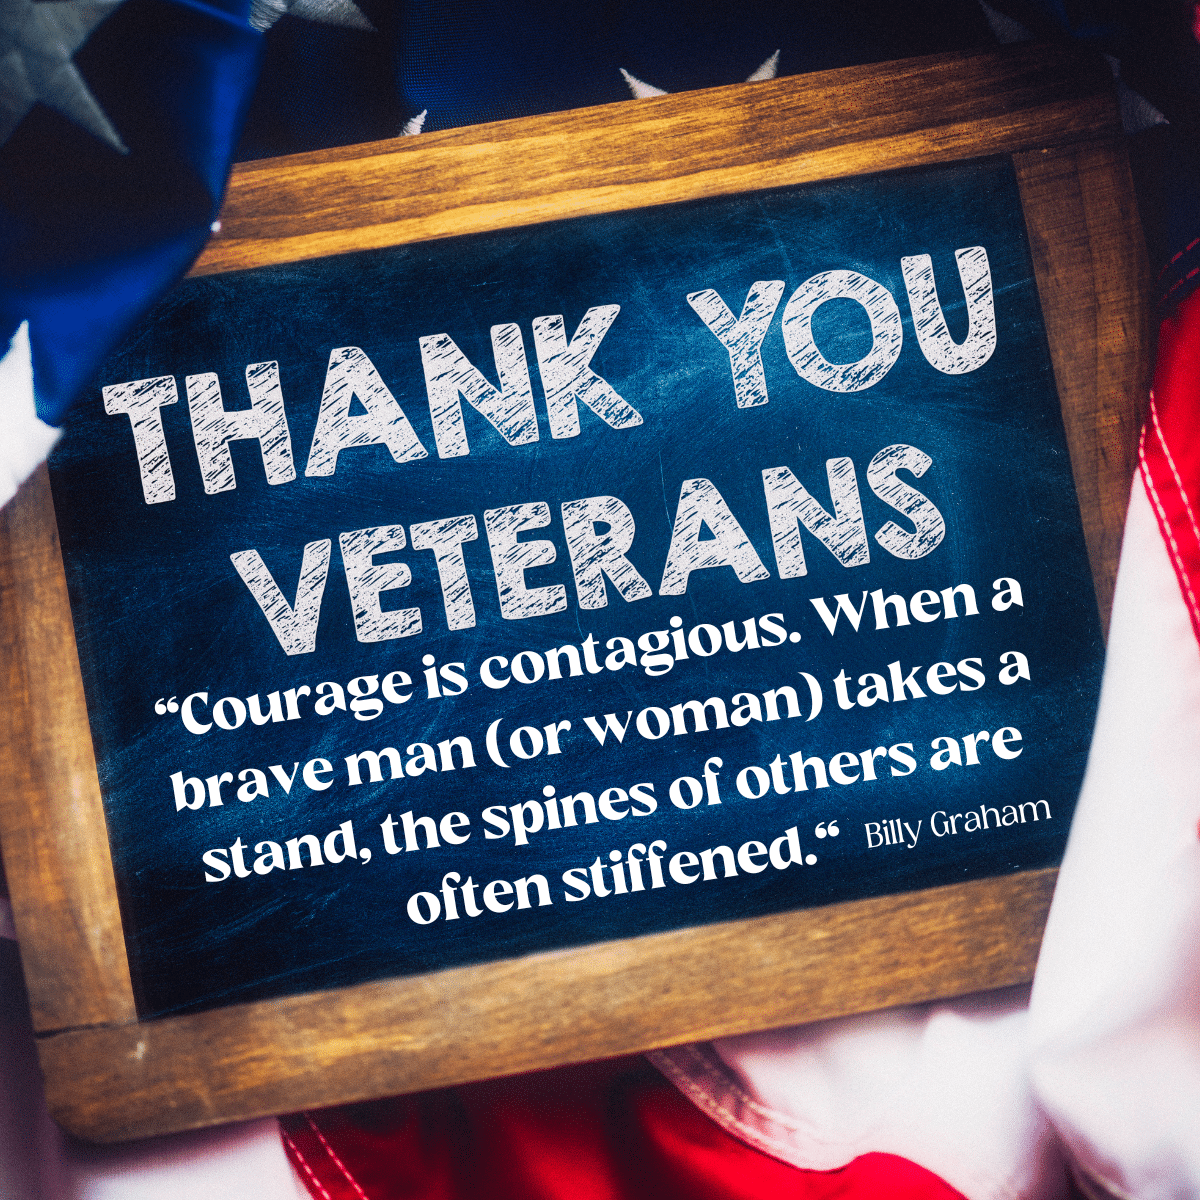 Veteran's Day Quote, Courage is contagious. When a brave man takes a stand the spines of others are often stiffened." Billy Graham. 